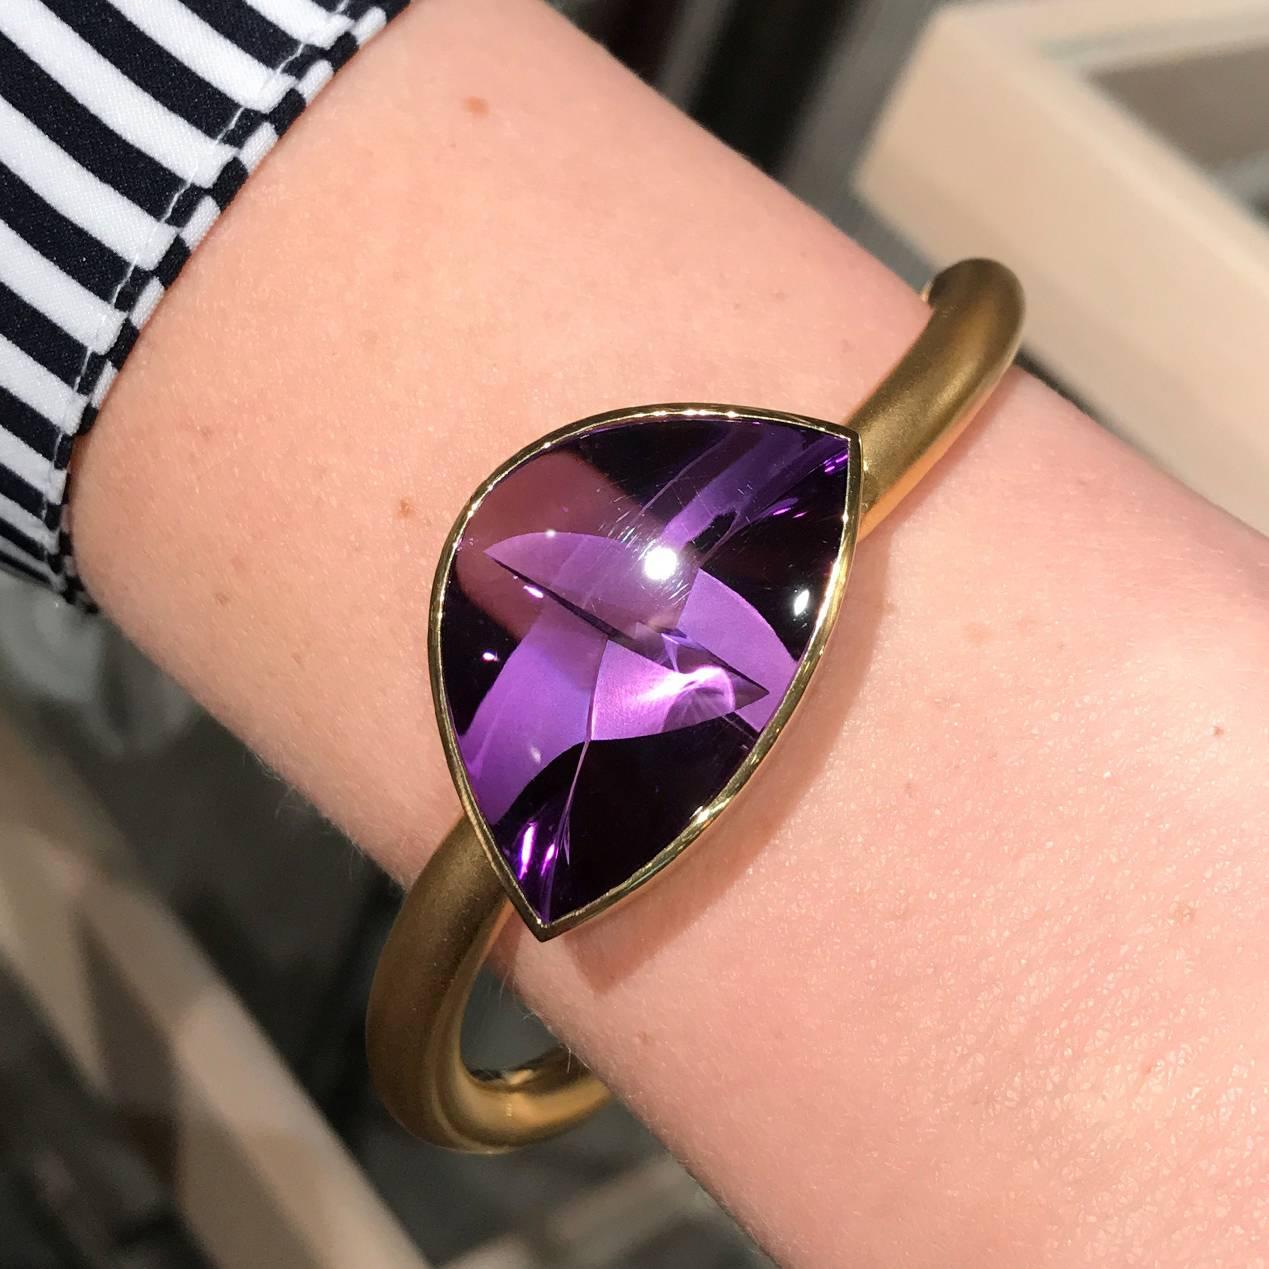 One of a Kind Bracelet handcrafted in Germany by internationally-renowned "Picasso of Gemstones" Atelier Munsteiner, featuring a spectacular 30.98 carat amethyst bezel-set in polished 18k yellow gold and attached to a satin-finished solid